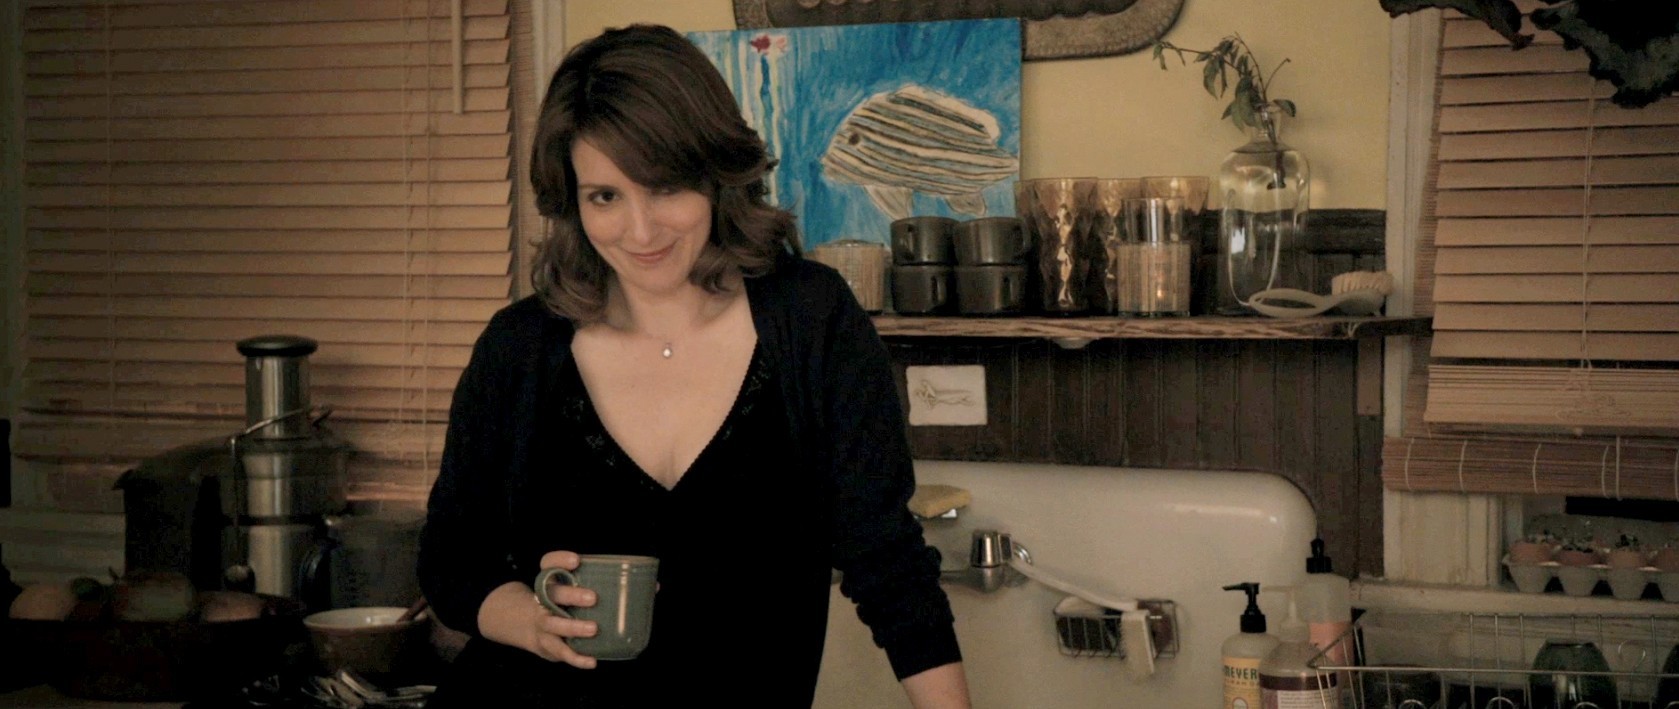 Tina Fey stars as Portia Nathan in Focus Features' Admission (2013)